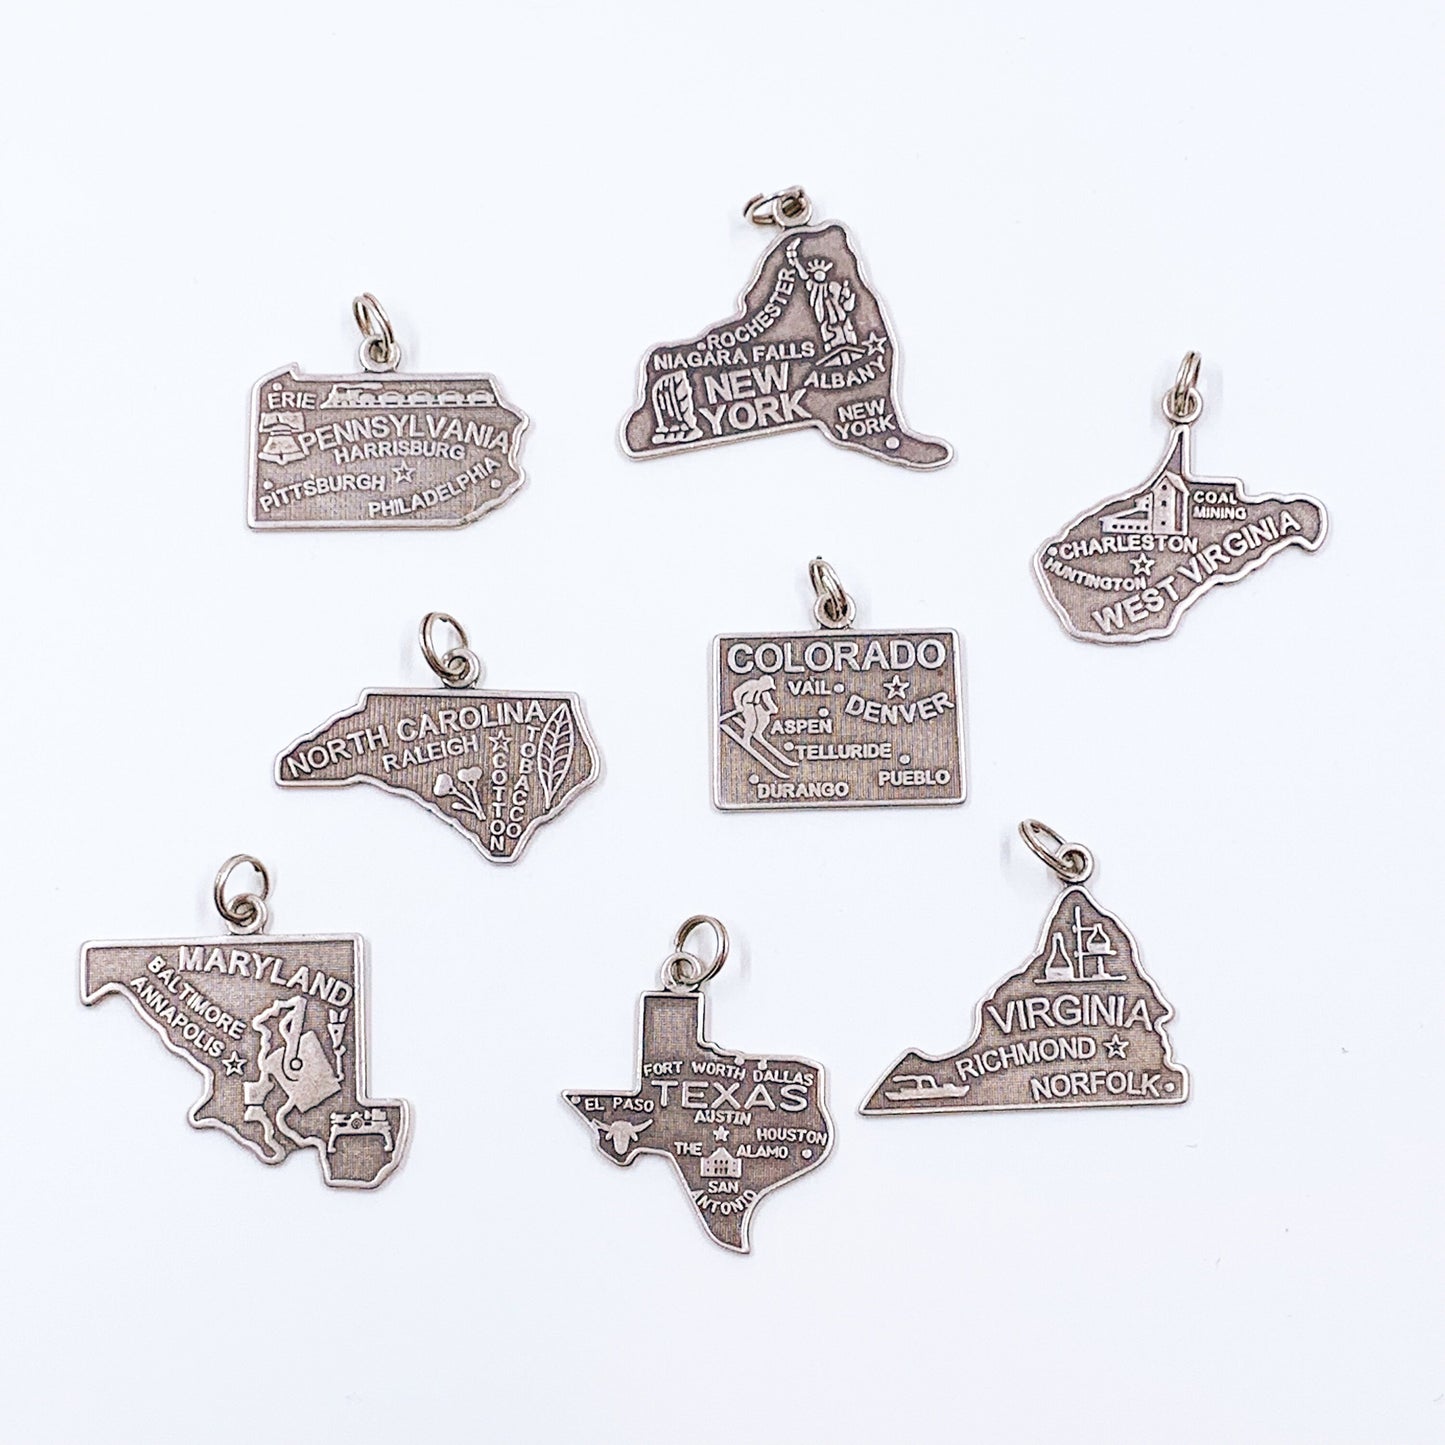 Vintage Virginia State Charm | Silver State of Virginia Charm